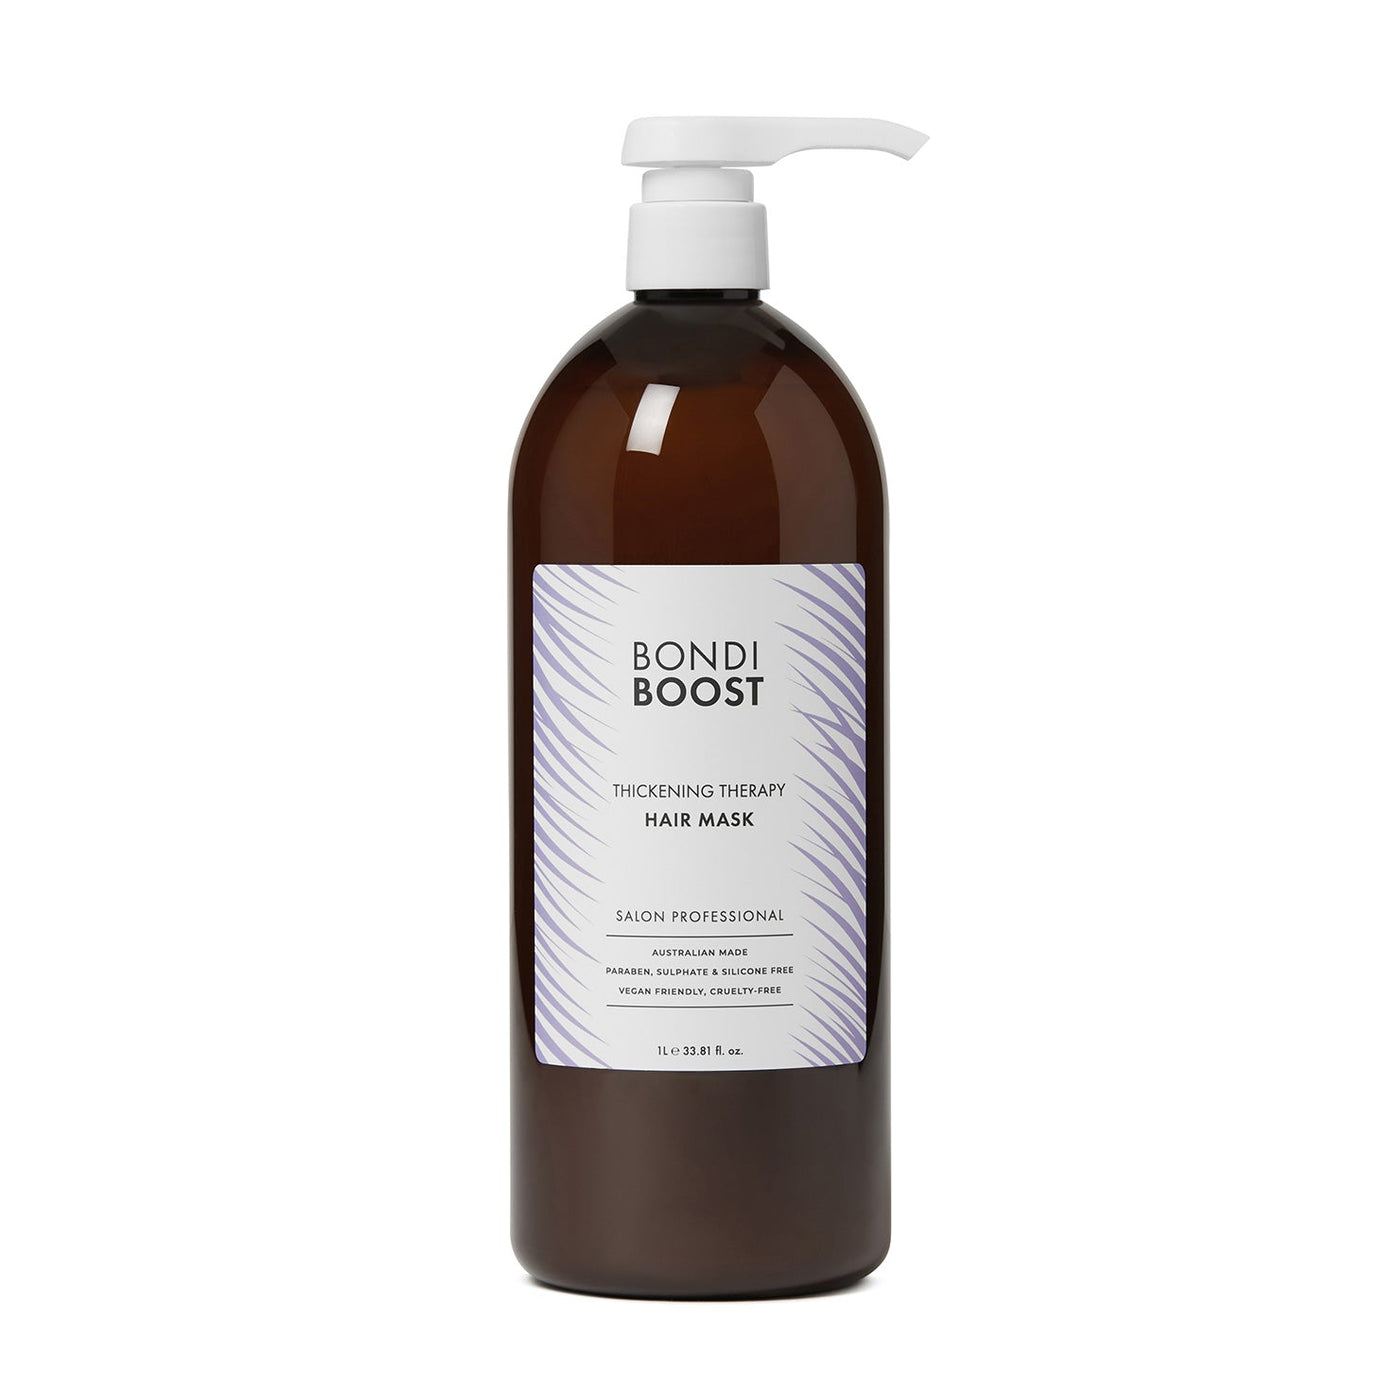 BondiBoost Thickening Therapy Hair Mask 1 Litre